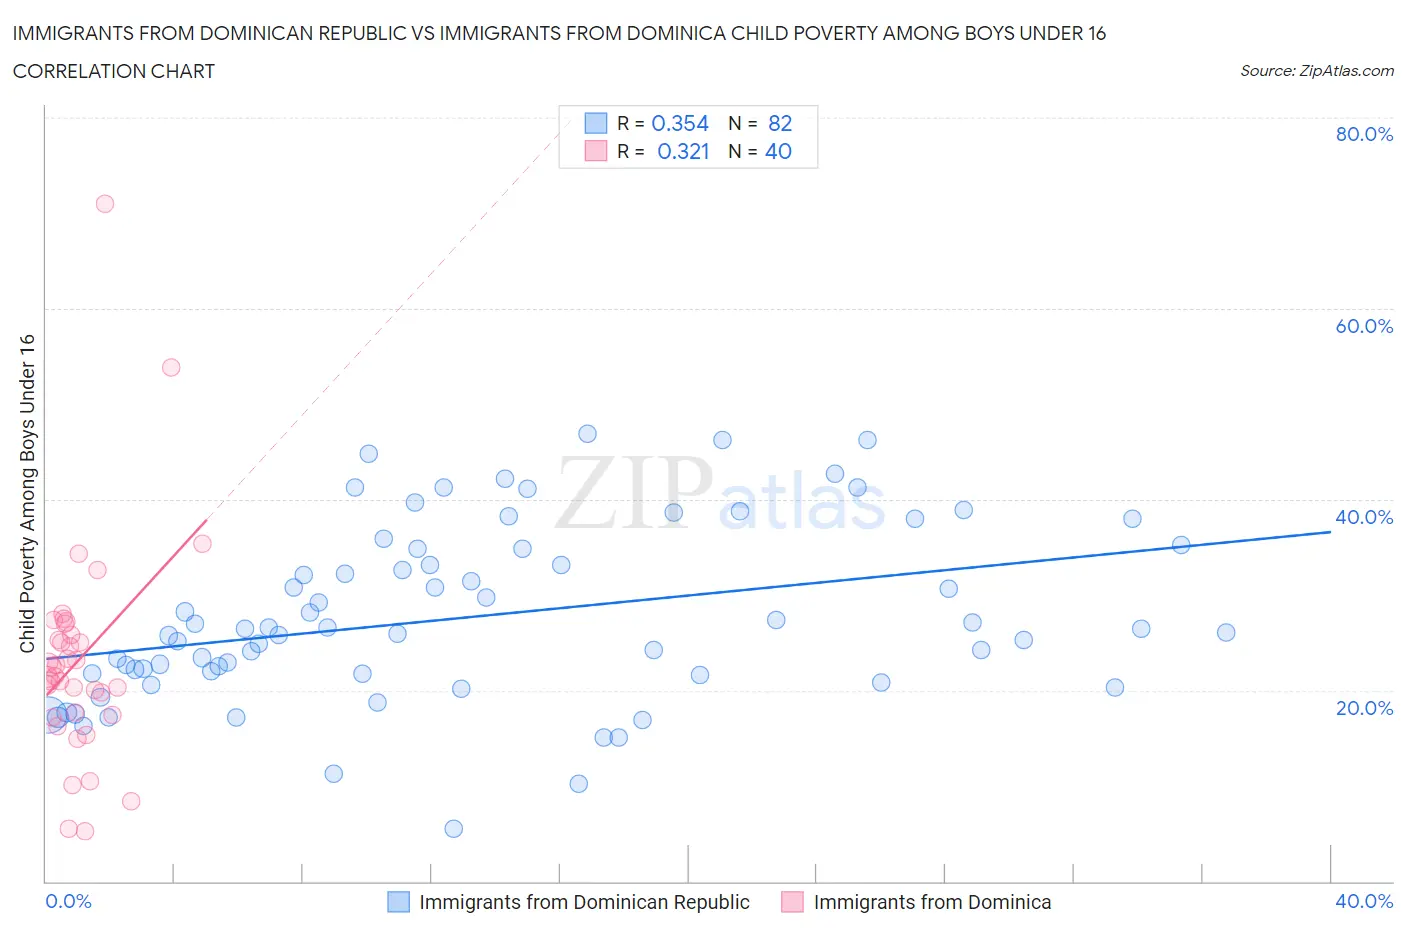 Immigrants from Dominican Republic vs Immigrants from Dominica Child Poverty Among Boys Under 16